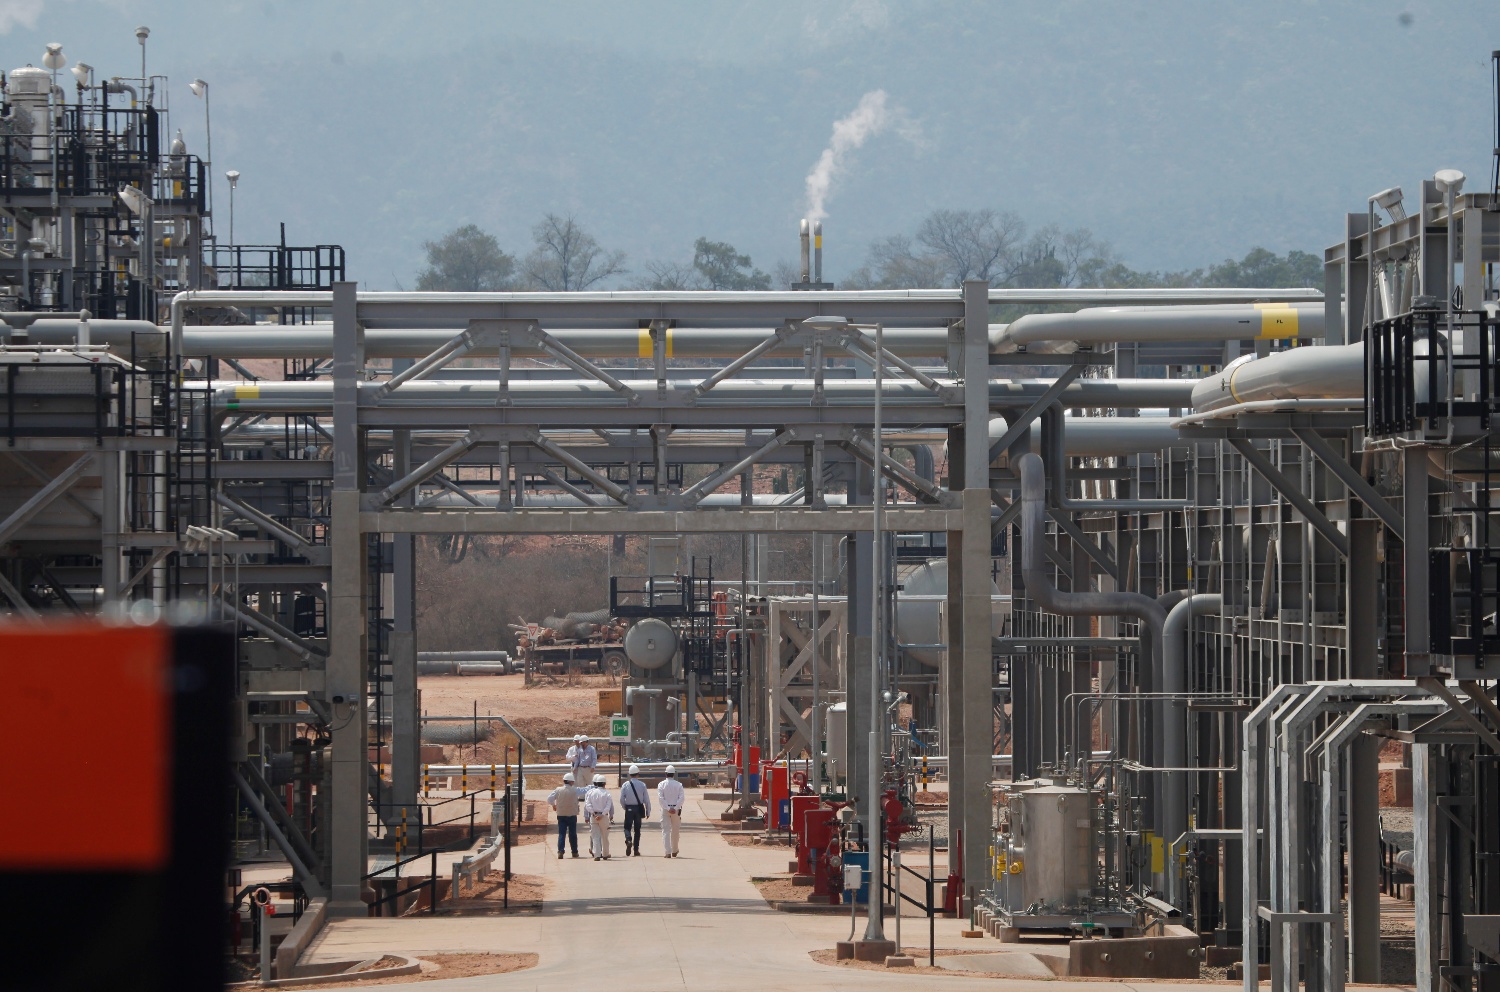 A group walks through an area at the Repsol plant before a ceremony to inaugurate the completion of a new phase at the Margarita-Huacaya gas refinery in the region of Chaco, southeast of Bolivia, Tuesday, Oct. 1, 2013.